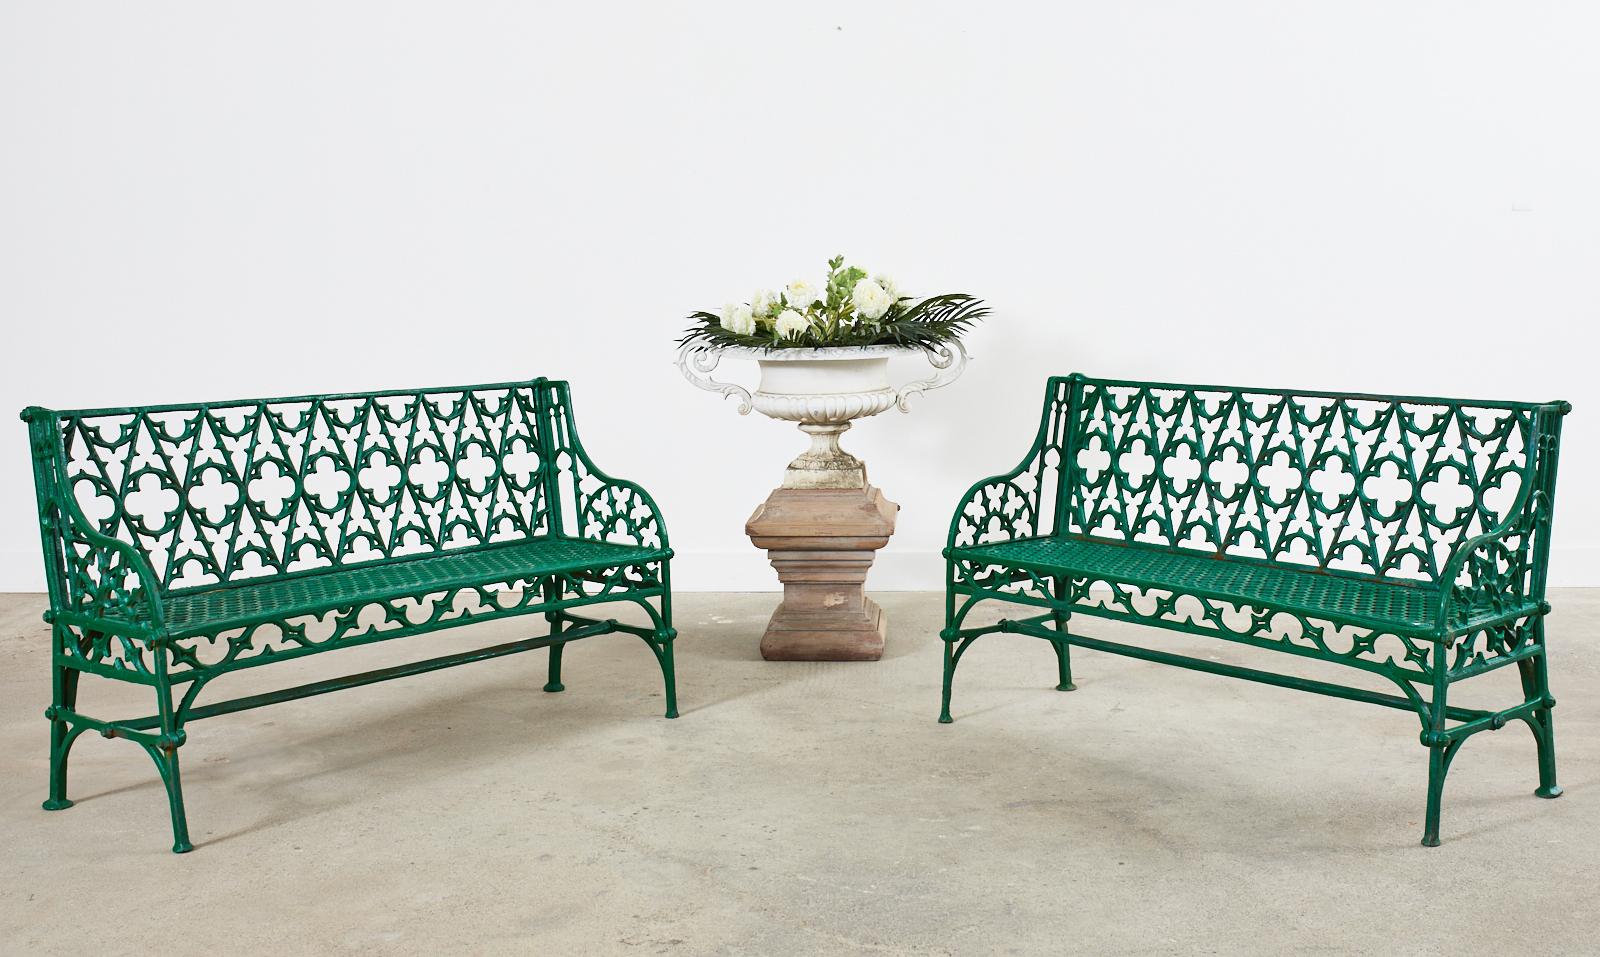 Spectacular pair of kelly green lacquered English Coalbrookdale foundry attributed cast iron garden benches. Made in the dramatic gothic revival taste featuring a gothic tracery backrest centered by quatrefoil form designs. The gracefully curved